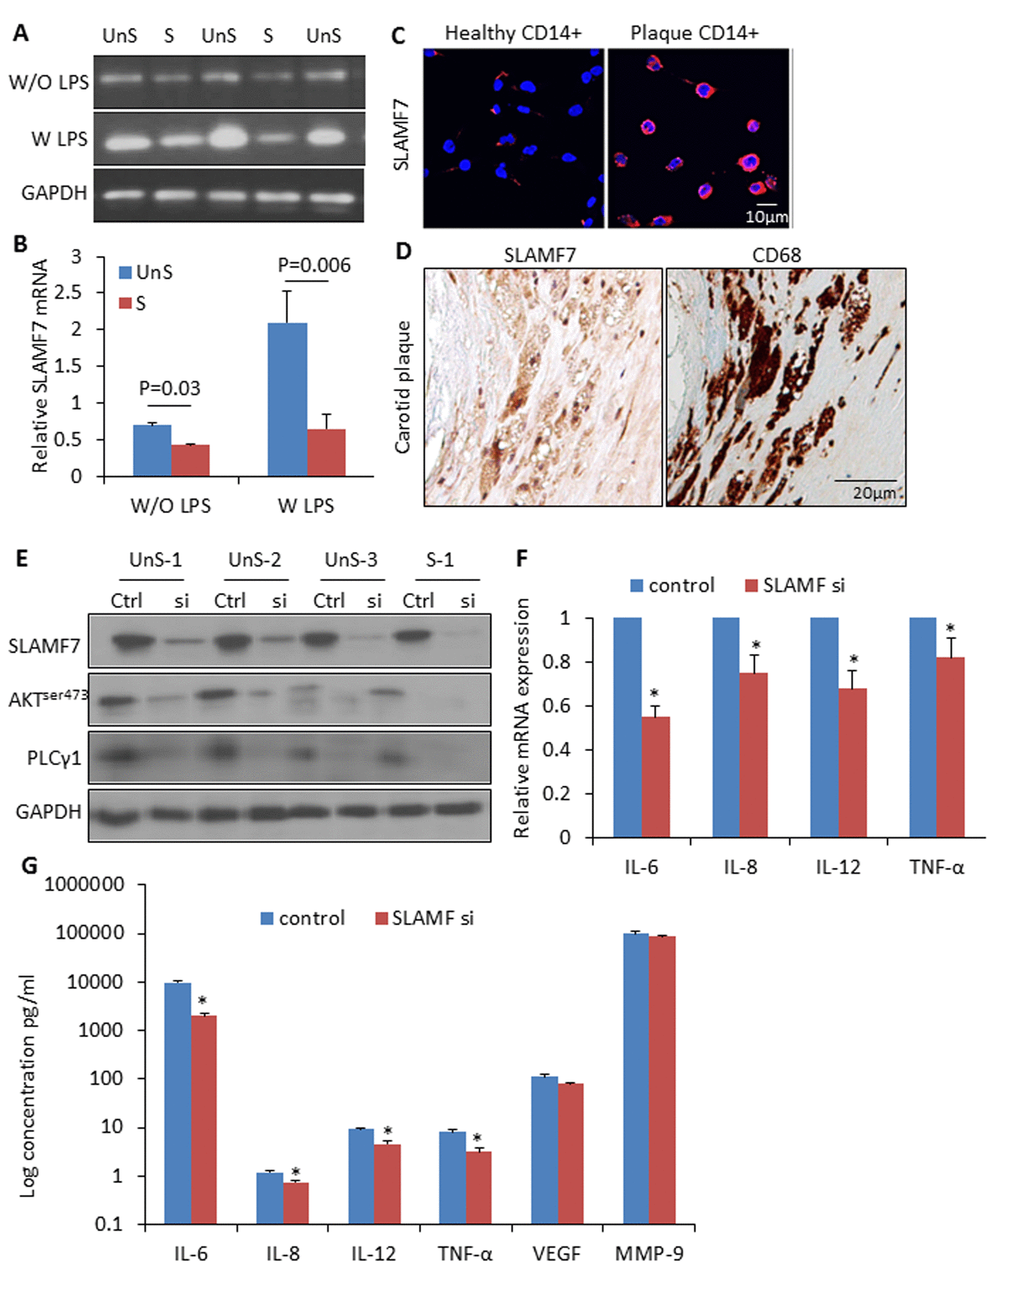 High expression of SLAMF7 in CD14+ plaque monocytes stimulates proinflammatory cytokine production. (A) CD14+ macrophages were isolated from human atherosclerotic plaques, and cultured for 24 hours. SLAMF7 mRNA was detected by RT-PCR with or without LPS (10ng/ml) stimulation for 3 hours. (B) Quantification of the SLAMF7 mRNA expression in UnS vs. S plaques. P=0.03 W/O LPS, P=0.006 W LPS, by student’s t test. (C) Immunofluorescent staining of SLAMF7 in CD14+ cells from healthy donor and one UnS plaque. (D) Immunohistochemistry staining of SLAMF7 in adjacent sections with anti-SLAMF7 and CD68 antibodies, respectively. (E) Transduction with specific siRNAs targeting SLAMF7 (SLAMF7 siRNA, 200nM) in the plaque-derived CD14+ cells for 24 hours resulted in a significant suppression of protein expressions of SLAMF7, AKTser473 and PLCγ1 by Western Blot analyses. (F-G) Transduction with SLAMF7 siRNAs in the plaque-derived CD14+ cells for 24 hours resulted in a significant reduction of proinflammatory cytokines IL-6, IL-8, IL-12 and TNF-α measured by RT-PCR (F) and ELISA (G). Independent experiments were done on CD14+ monocytes from 4 different donors and the results are shown as mean ± SD. *P